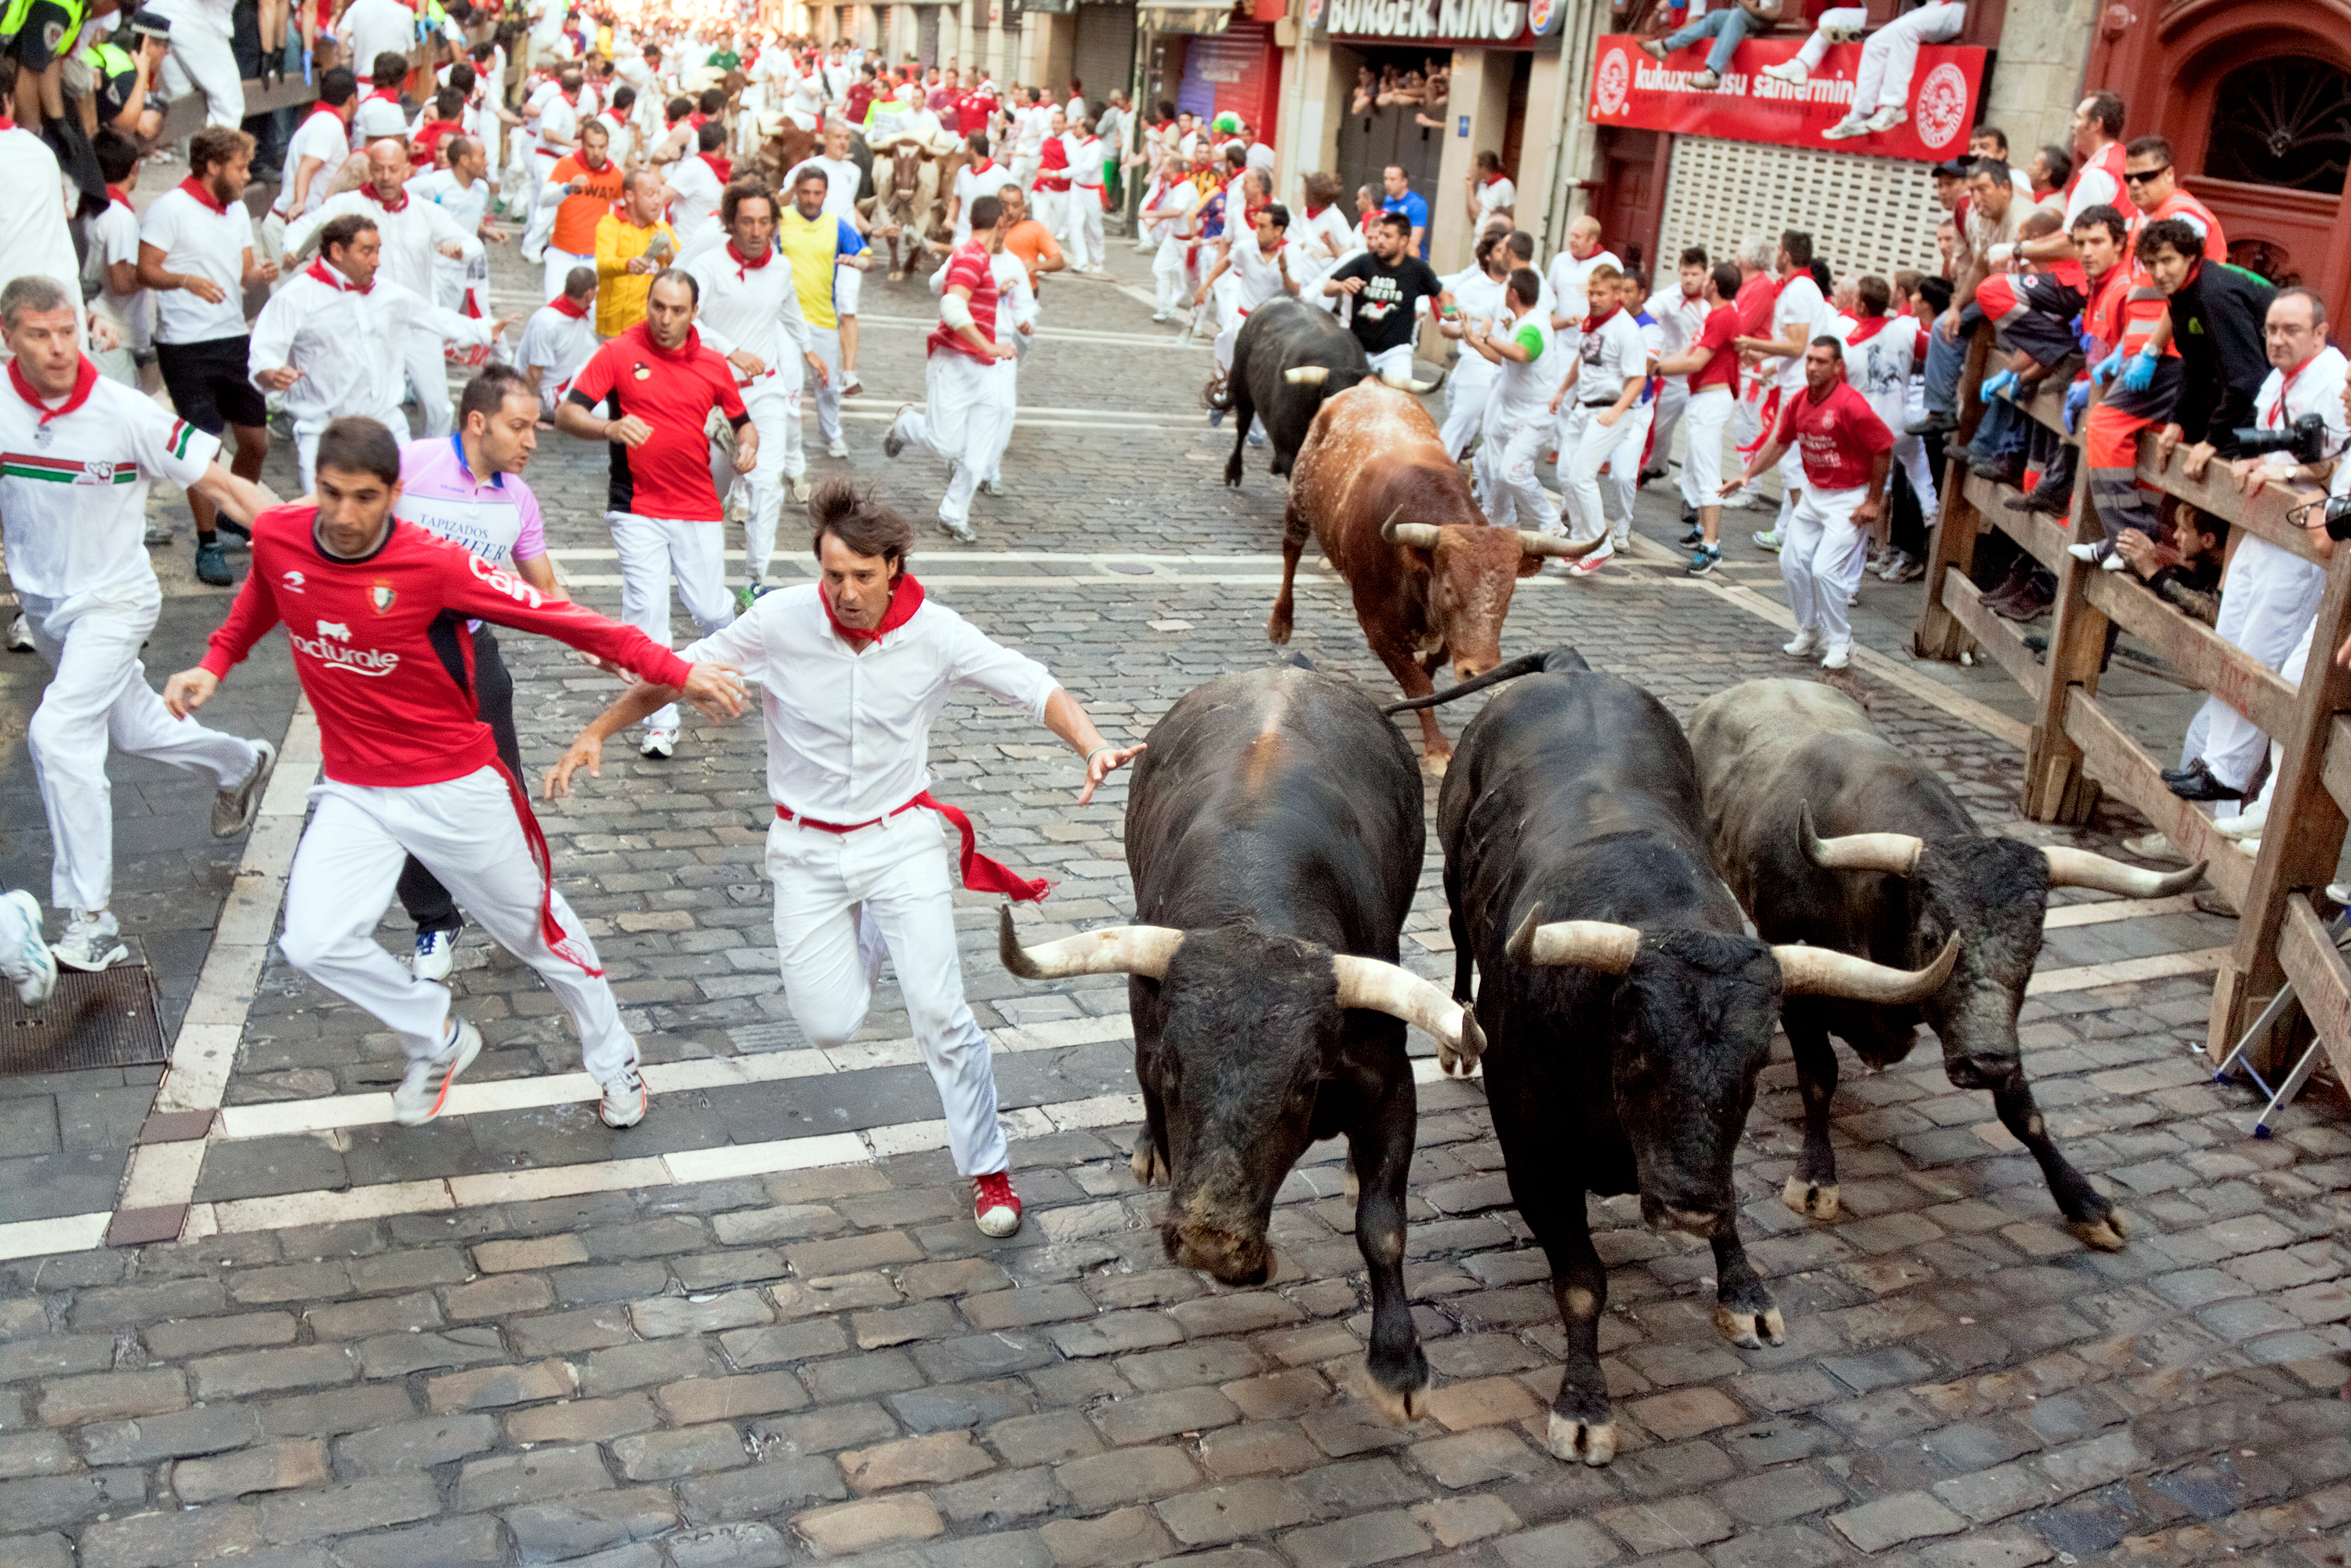 At festival of San Fermin. Pamplona